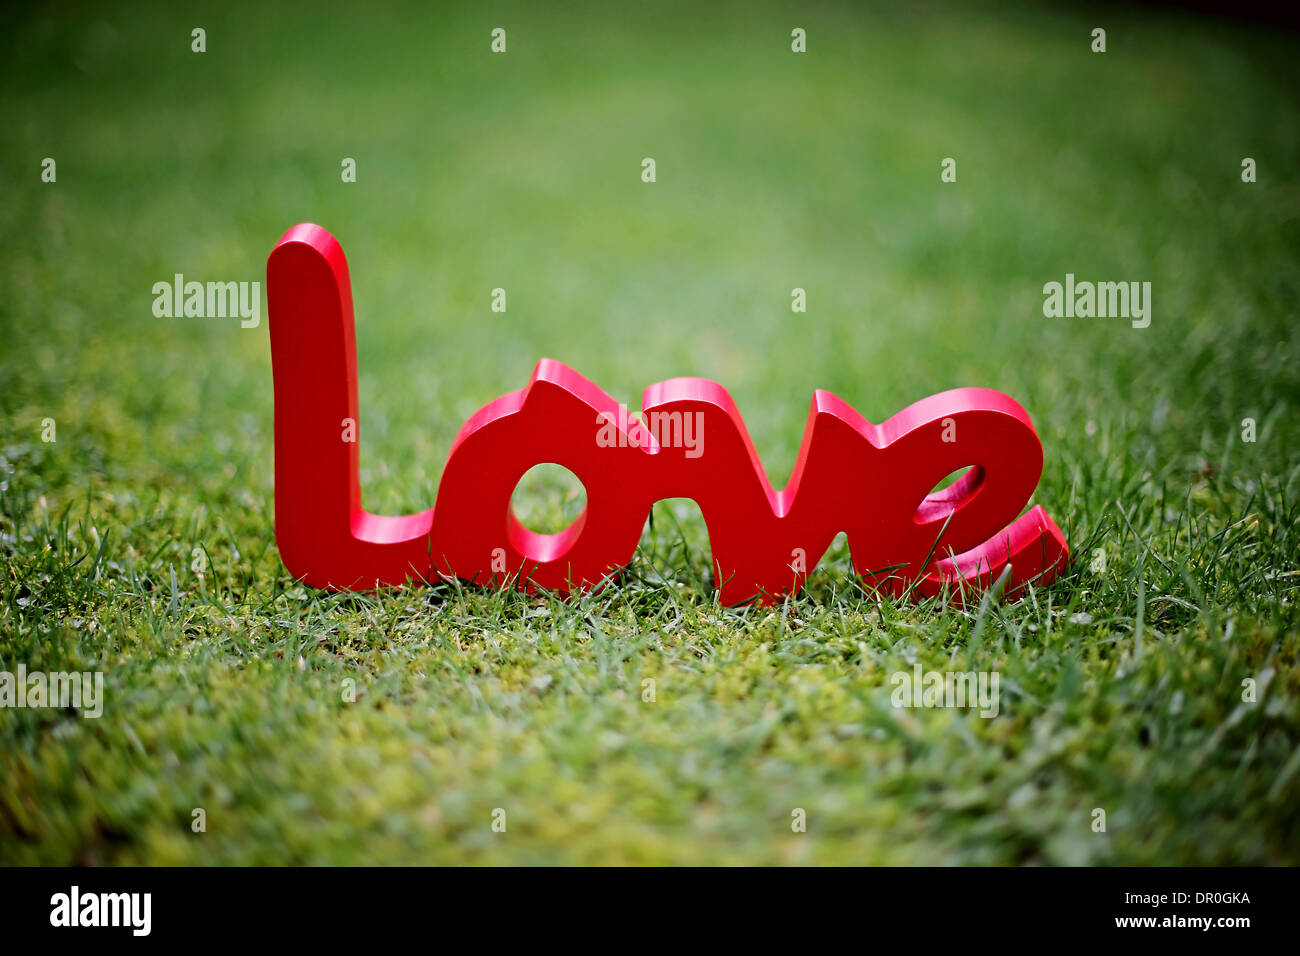 Love sign pictured on grass Stock Photo